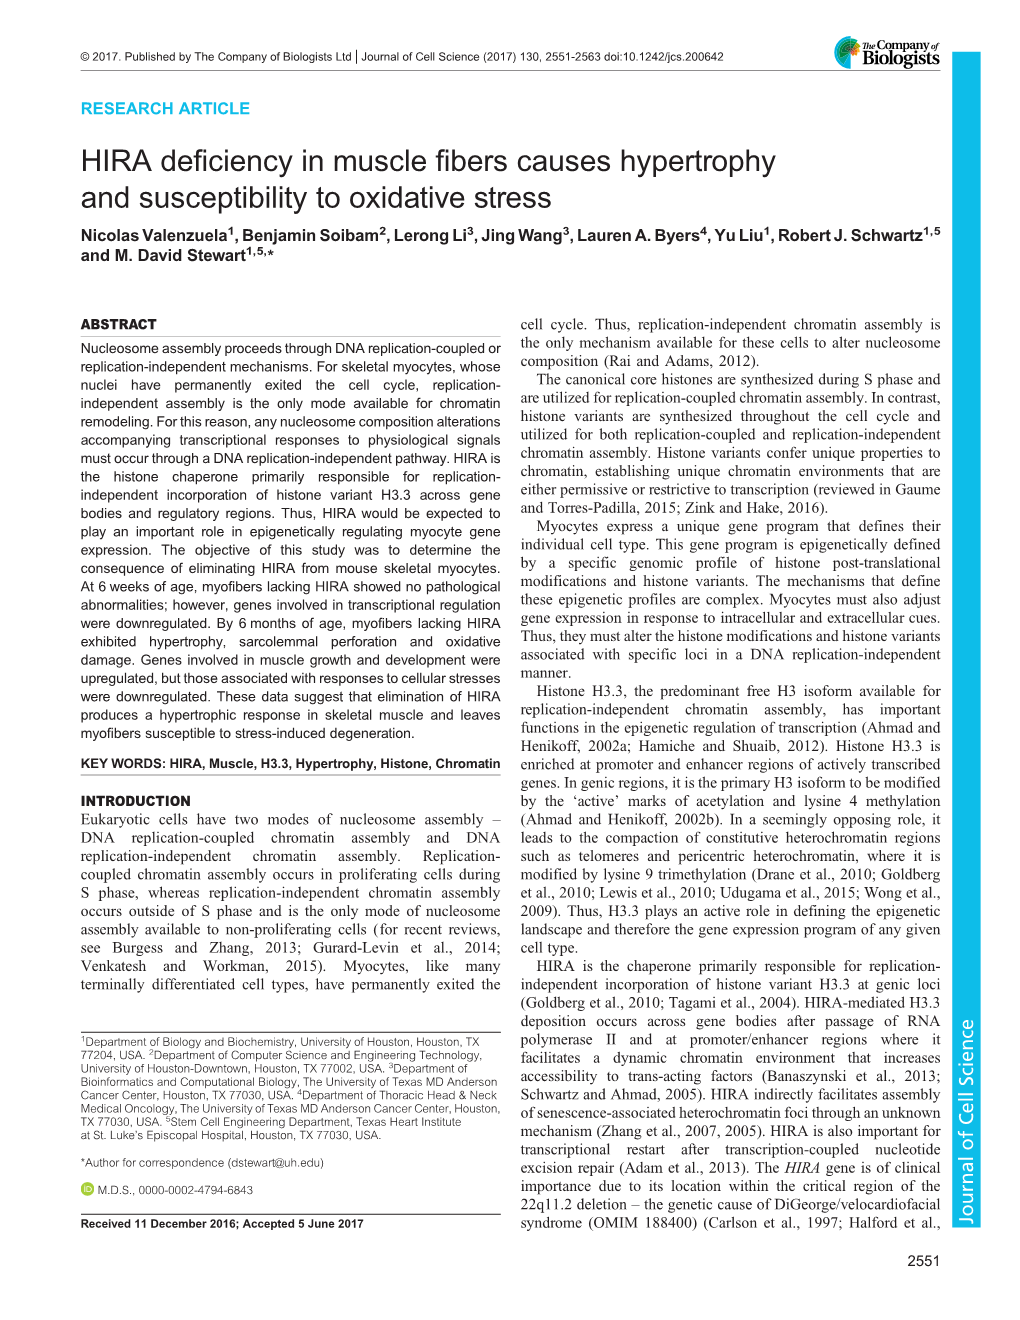 HIRA Deficiency in Muscle Fibers Causes Hypertrophy and Susceptibility to Oxidative Stress Nicolas Valenzuela1, Benjamin Soibam2, Lerong Li3, Jing Wang3, Lauren A